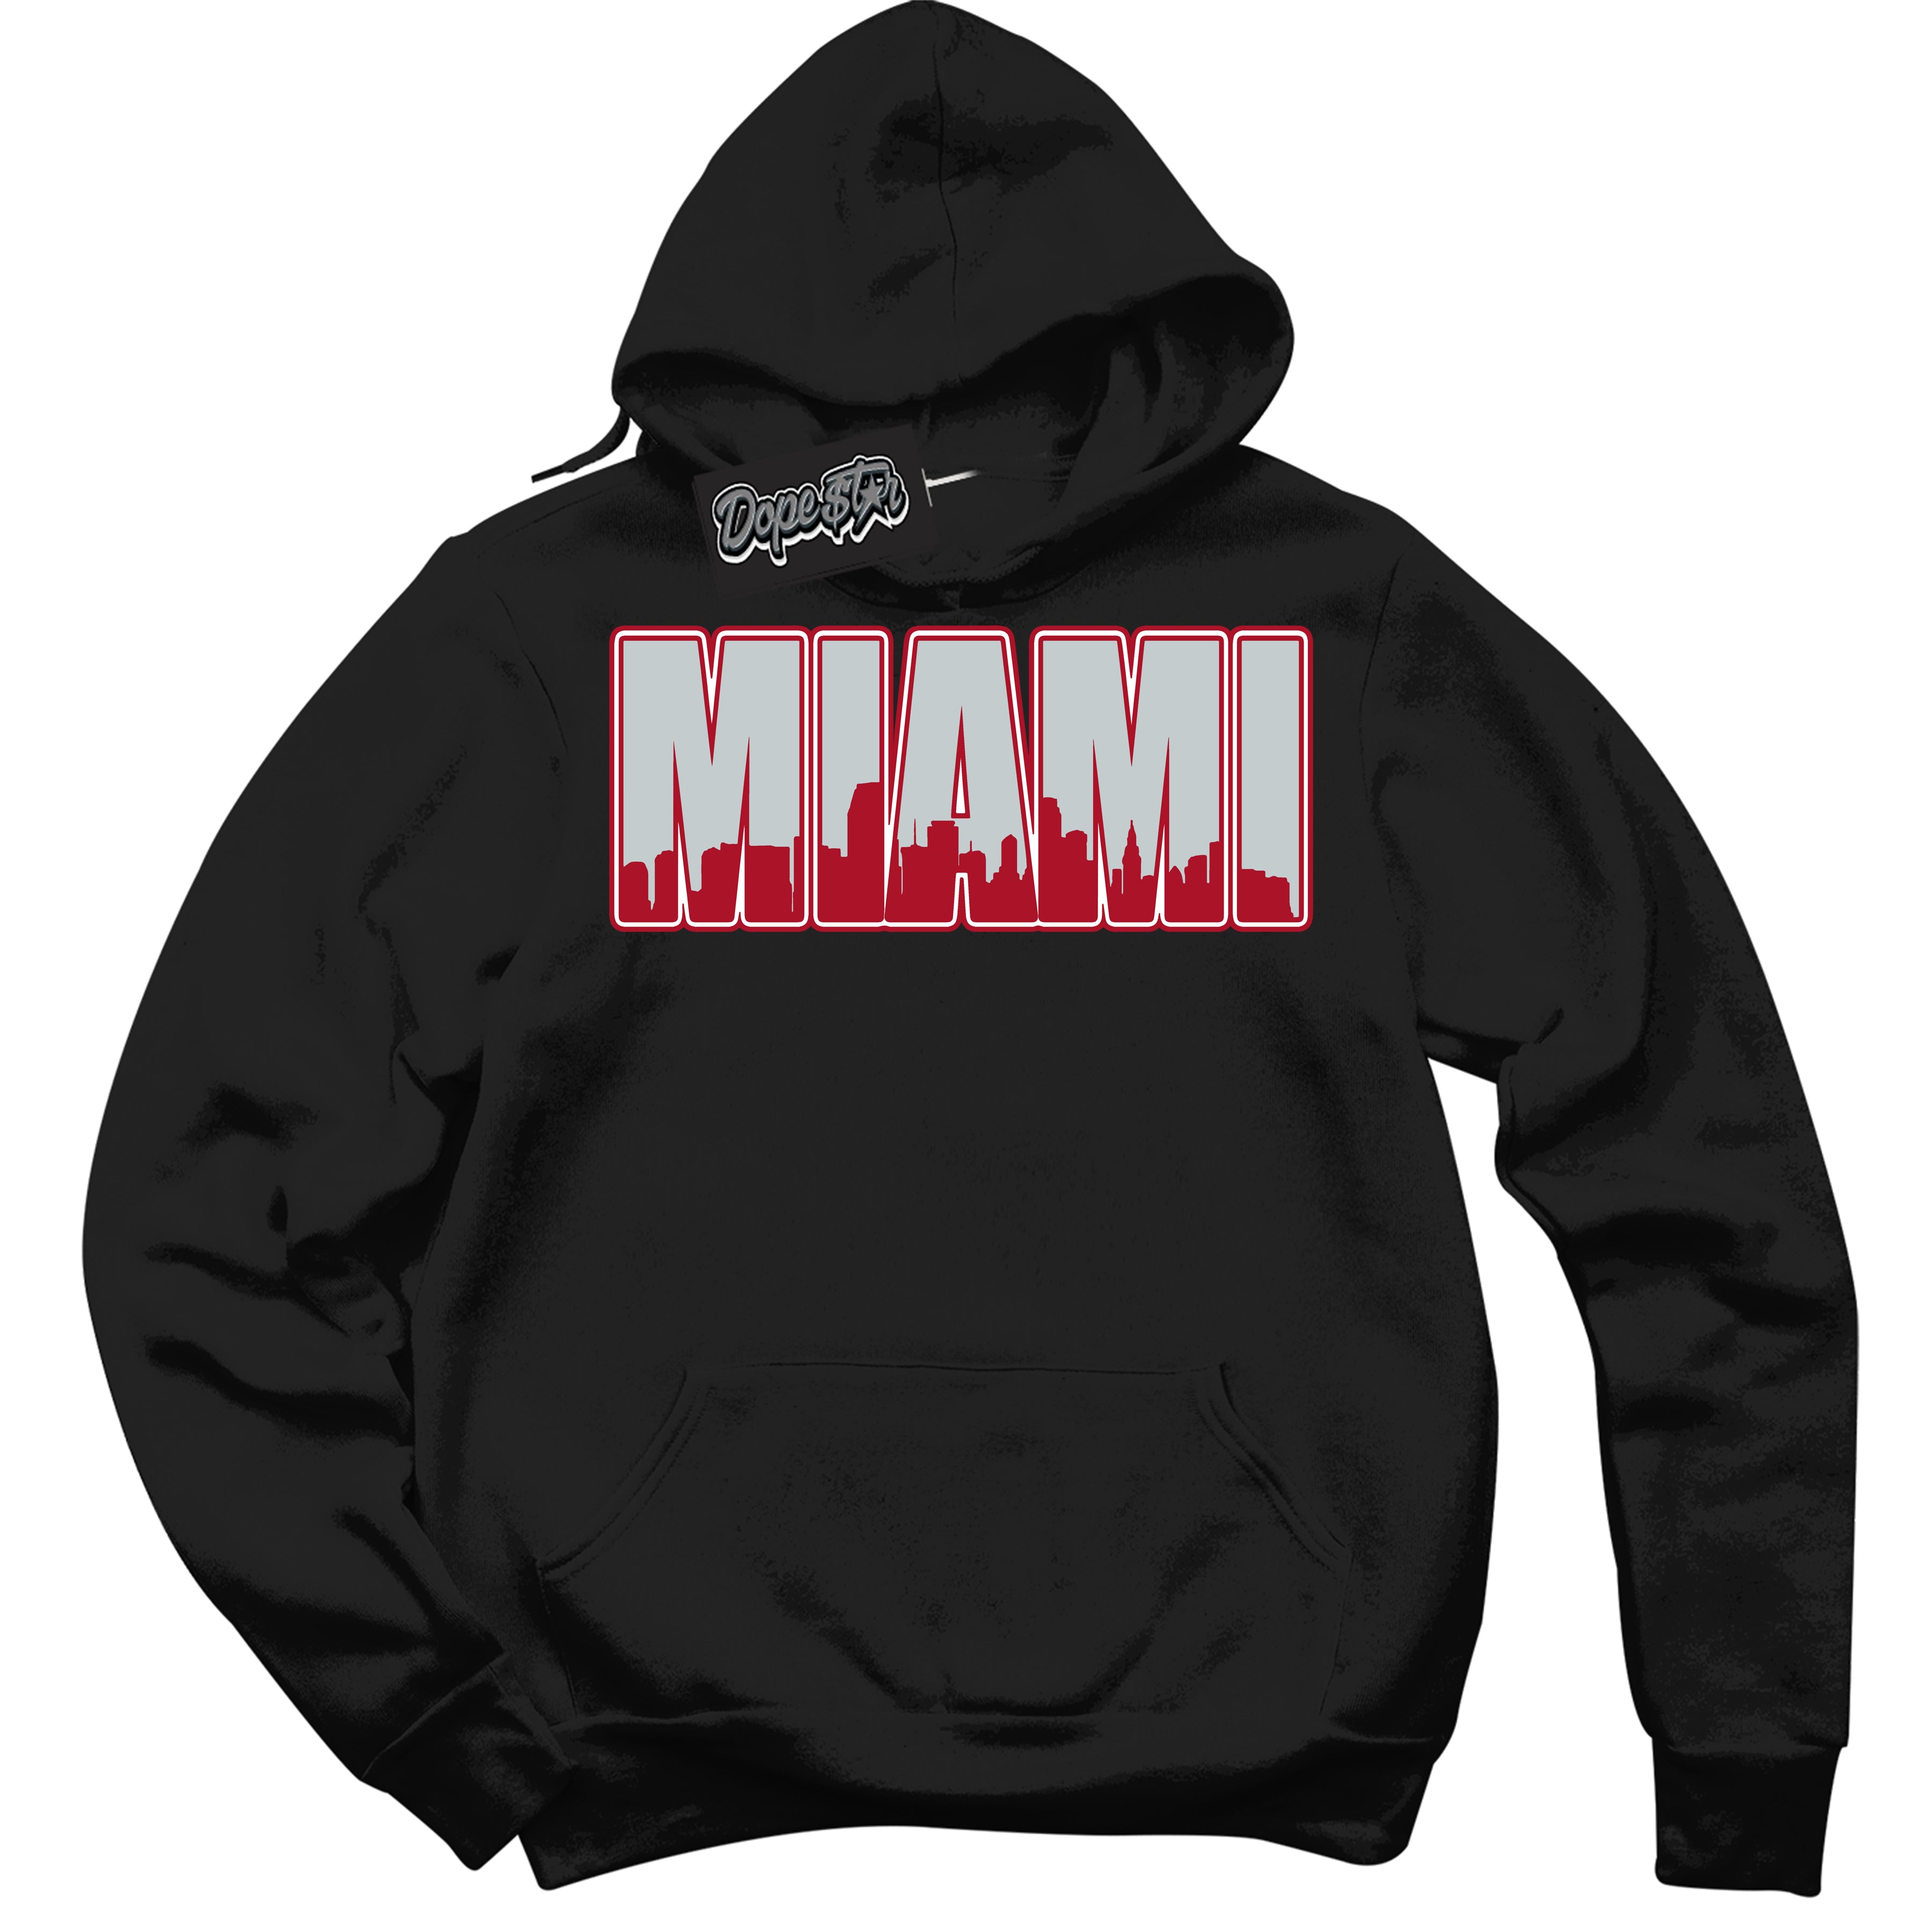 Cool Black Hoodie with “ Miami ”  design that Perfectly Matches  Reverse Ultraman Sneakers.